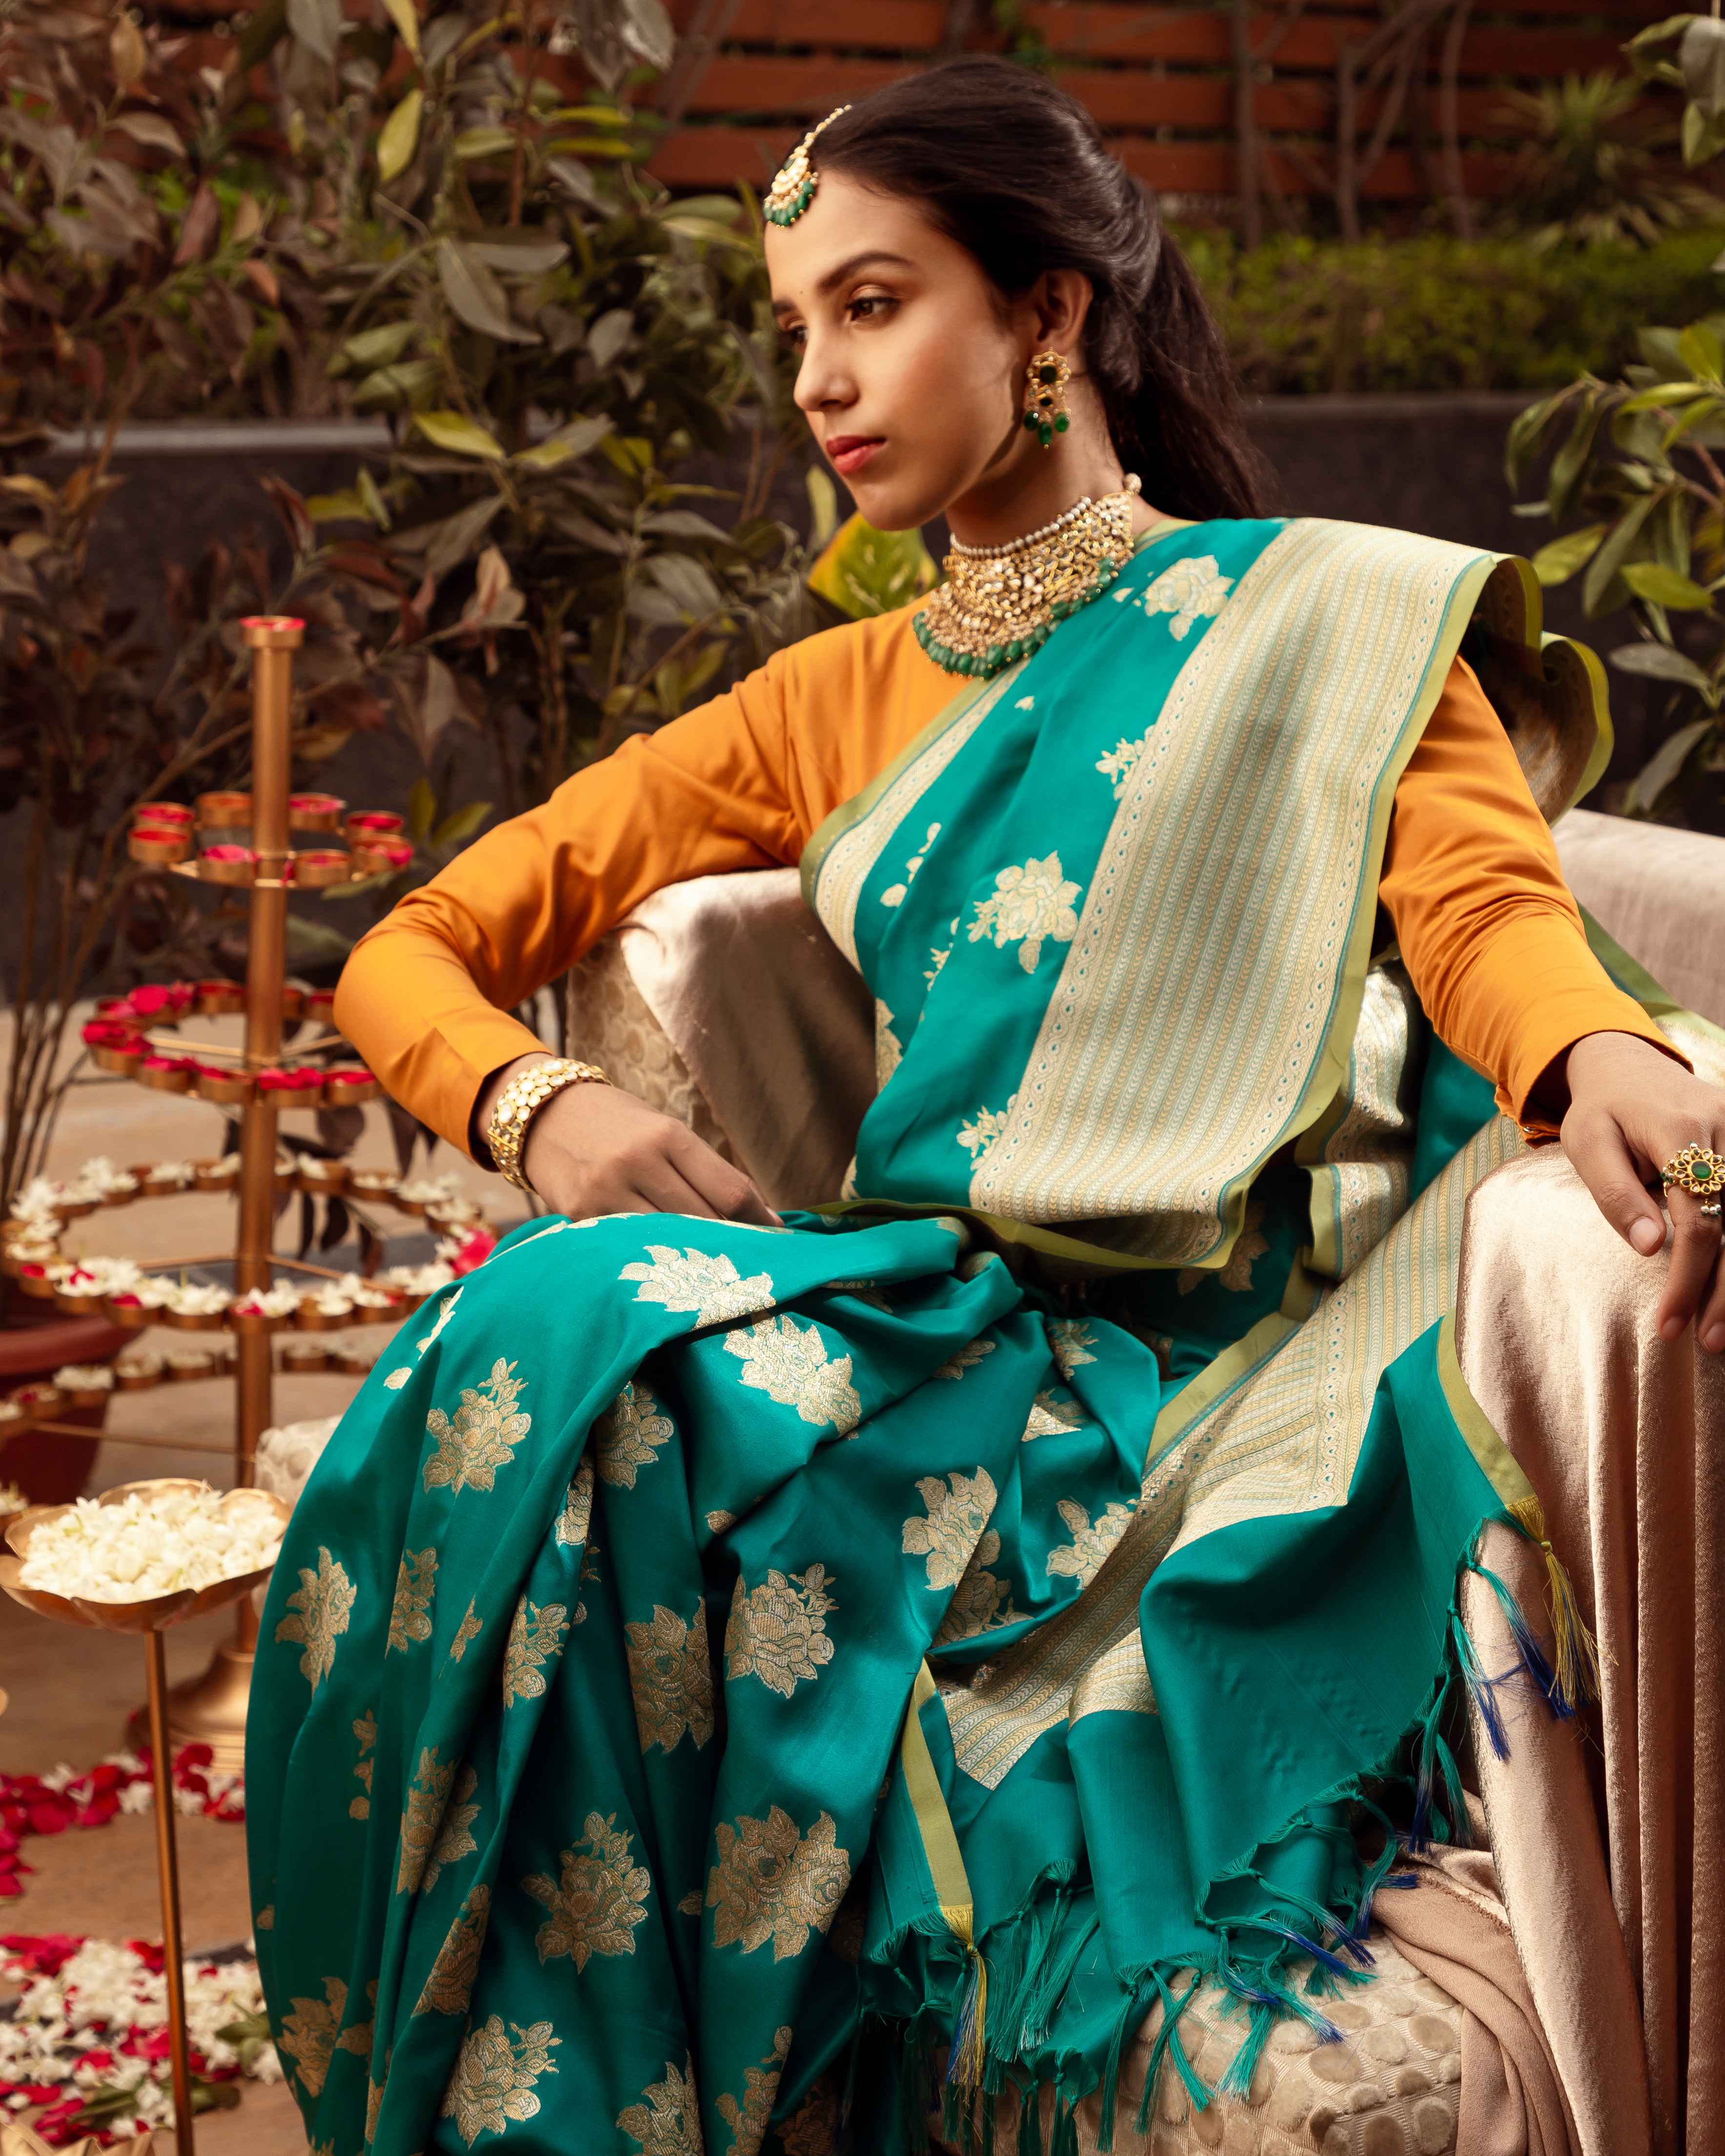 Experience The Beauty Of Heritage Handlooms At Singhania’s